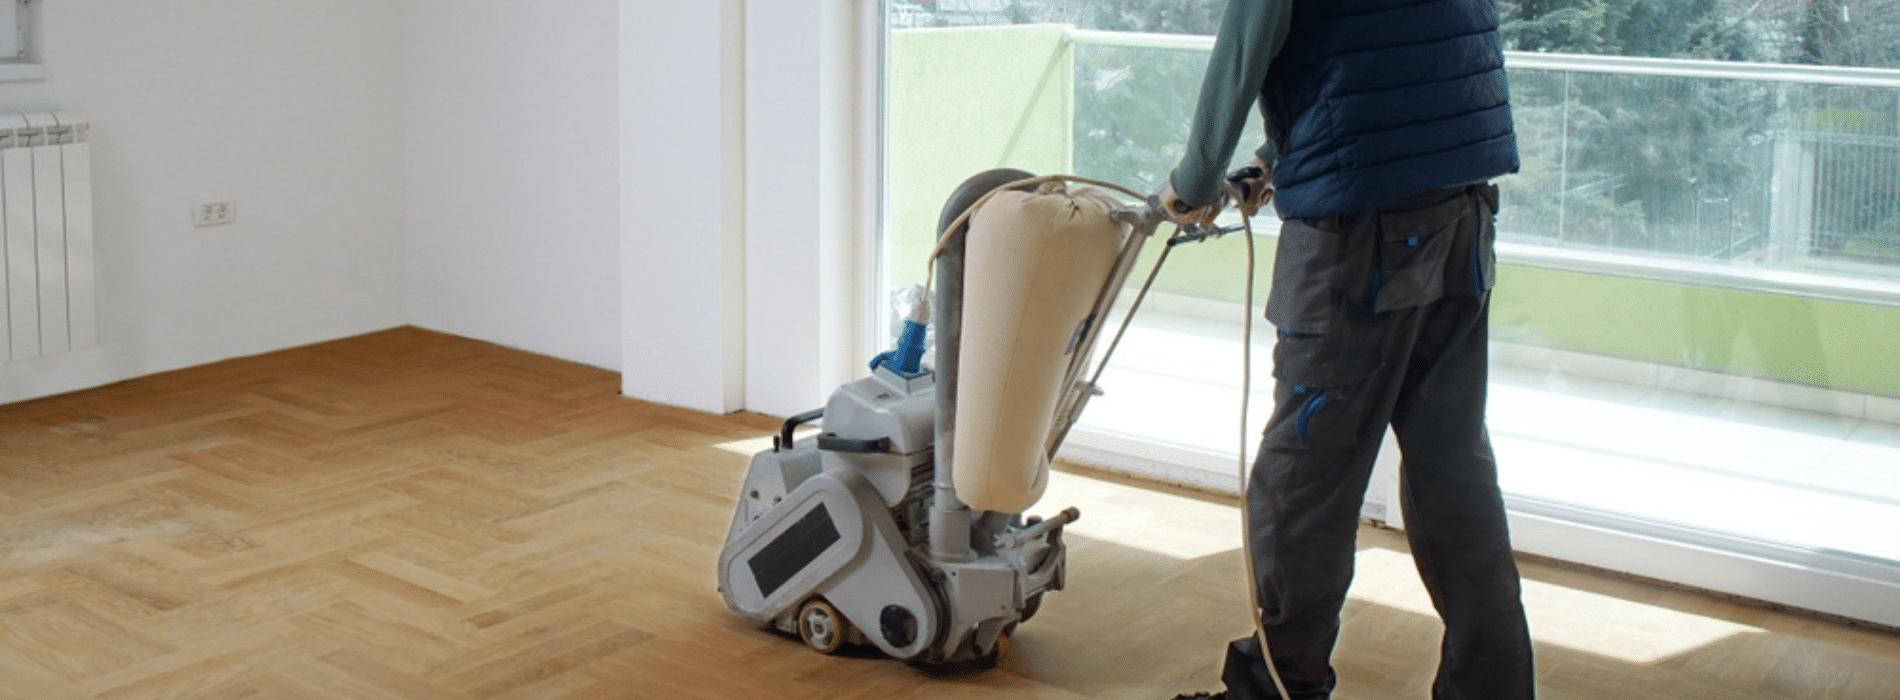 In Chigwell, IG7, Mr Sander® are using a Bona Scorpion drum sander, measuring 200 mm, with a 1.5 kW power and 240 V voltage. This sanding equipment operates at a frequency of 50 Hz and is connected to a dust extraction system equipped with a HEPA filter, ensuring a thorough and tidy outcome.